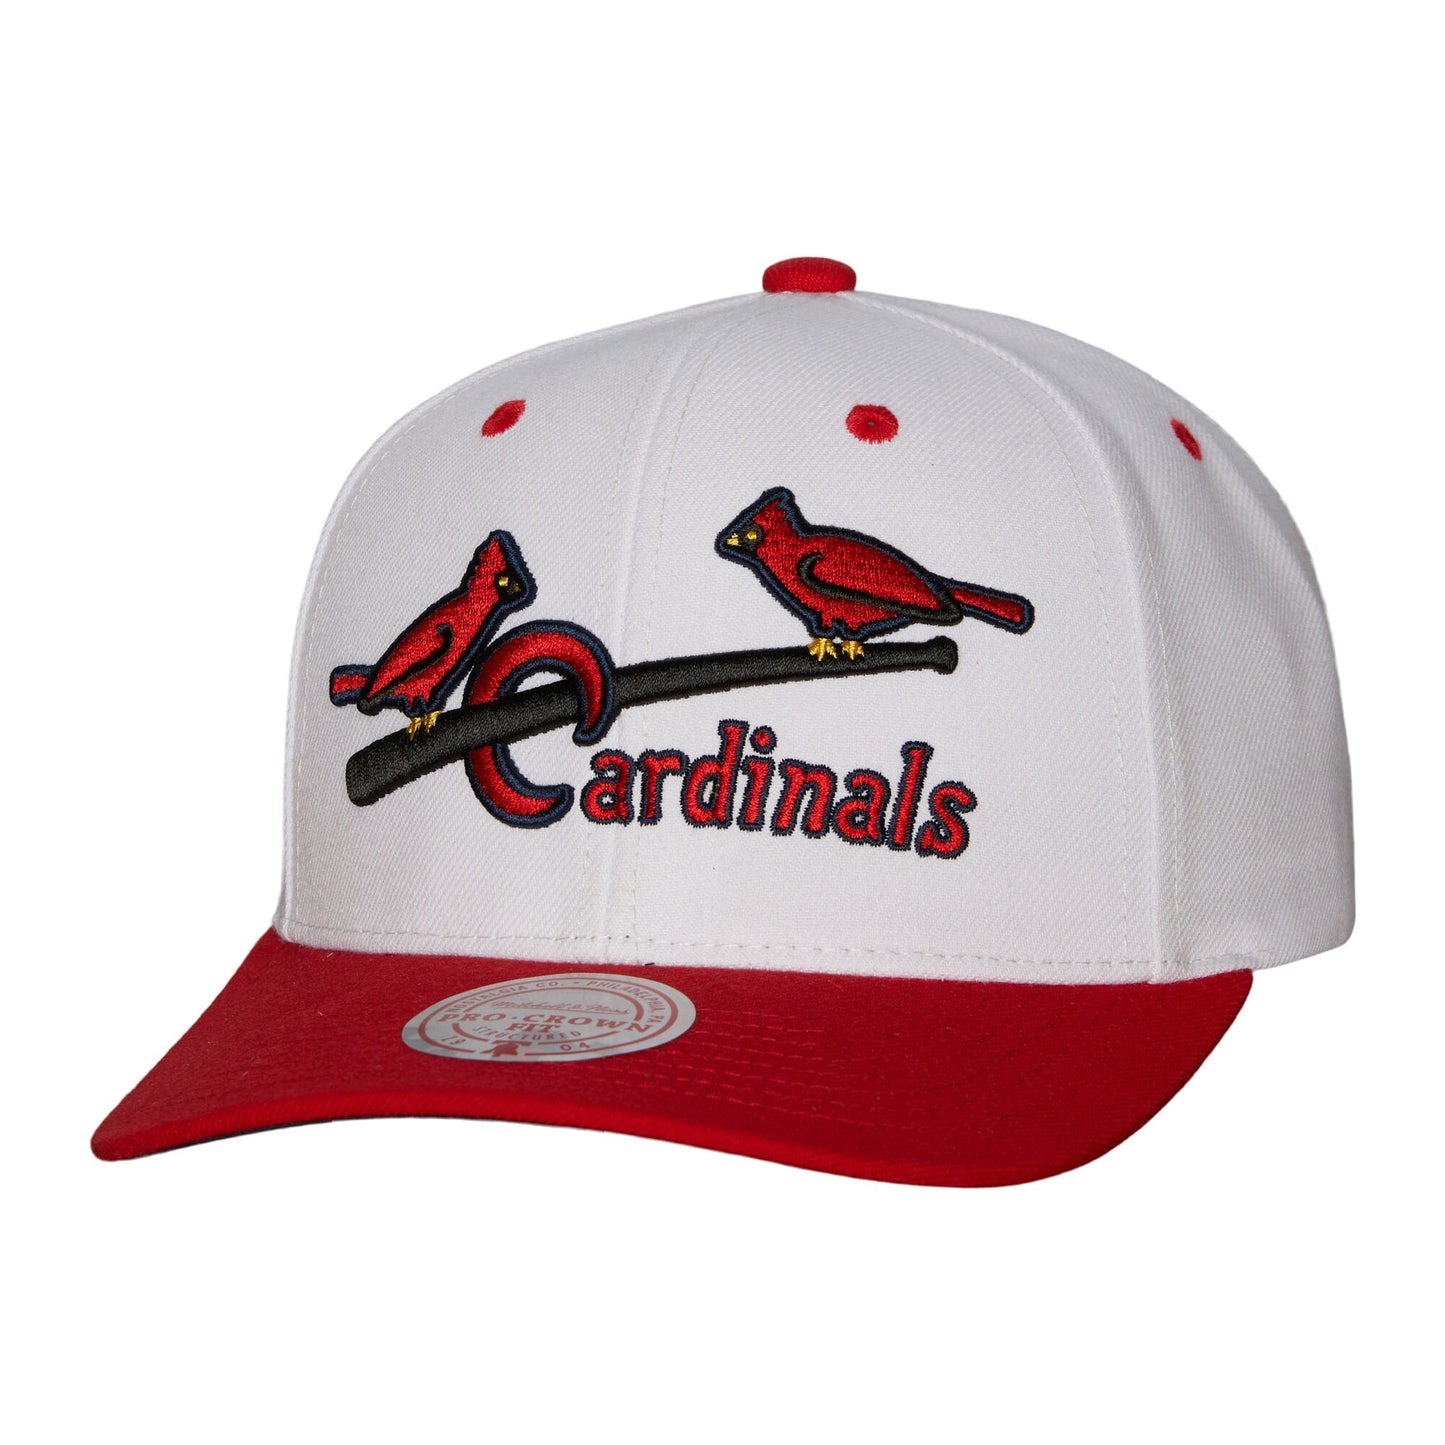 St. Louis Cardinals Mitchell & Ness Cooperstown Collection Pro Crown Snapback Hat - White